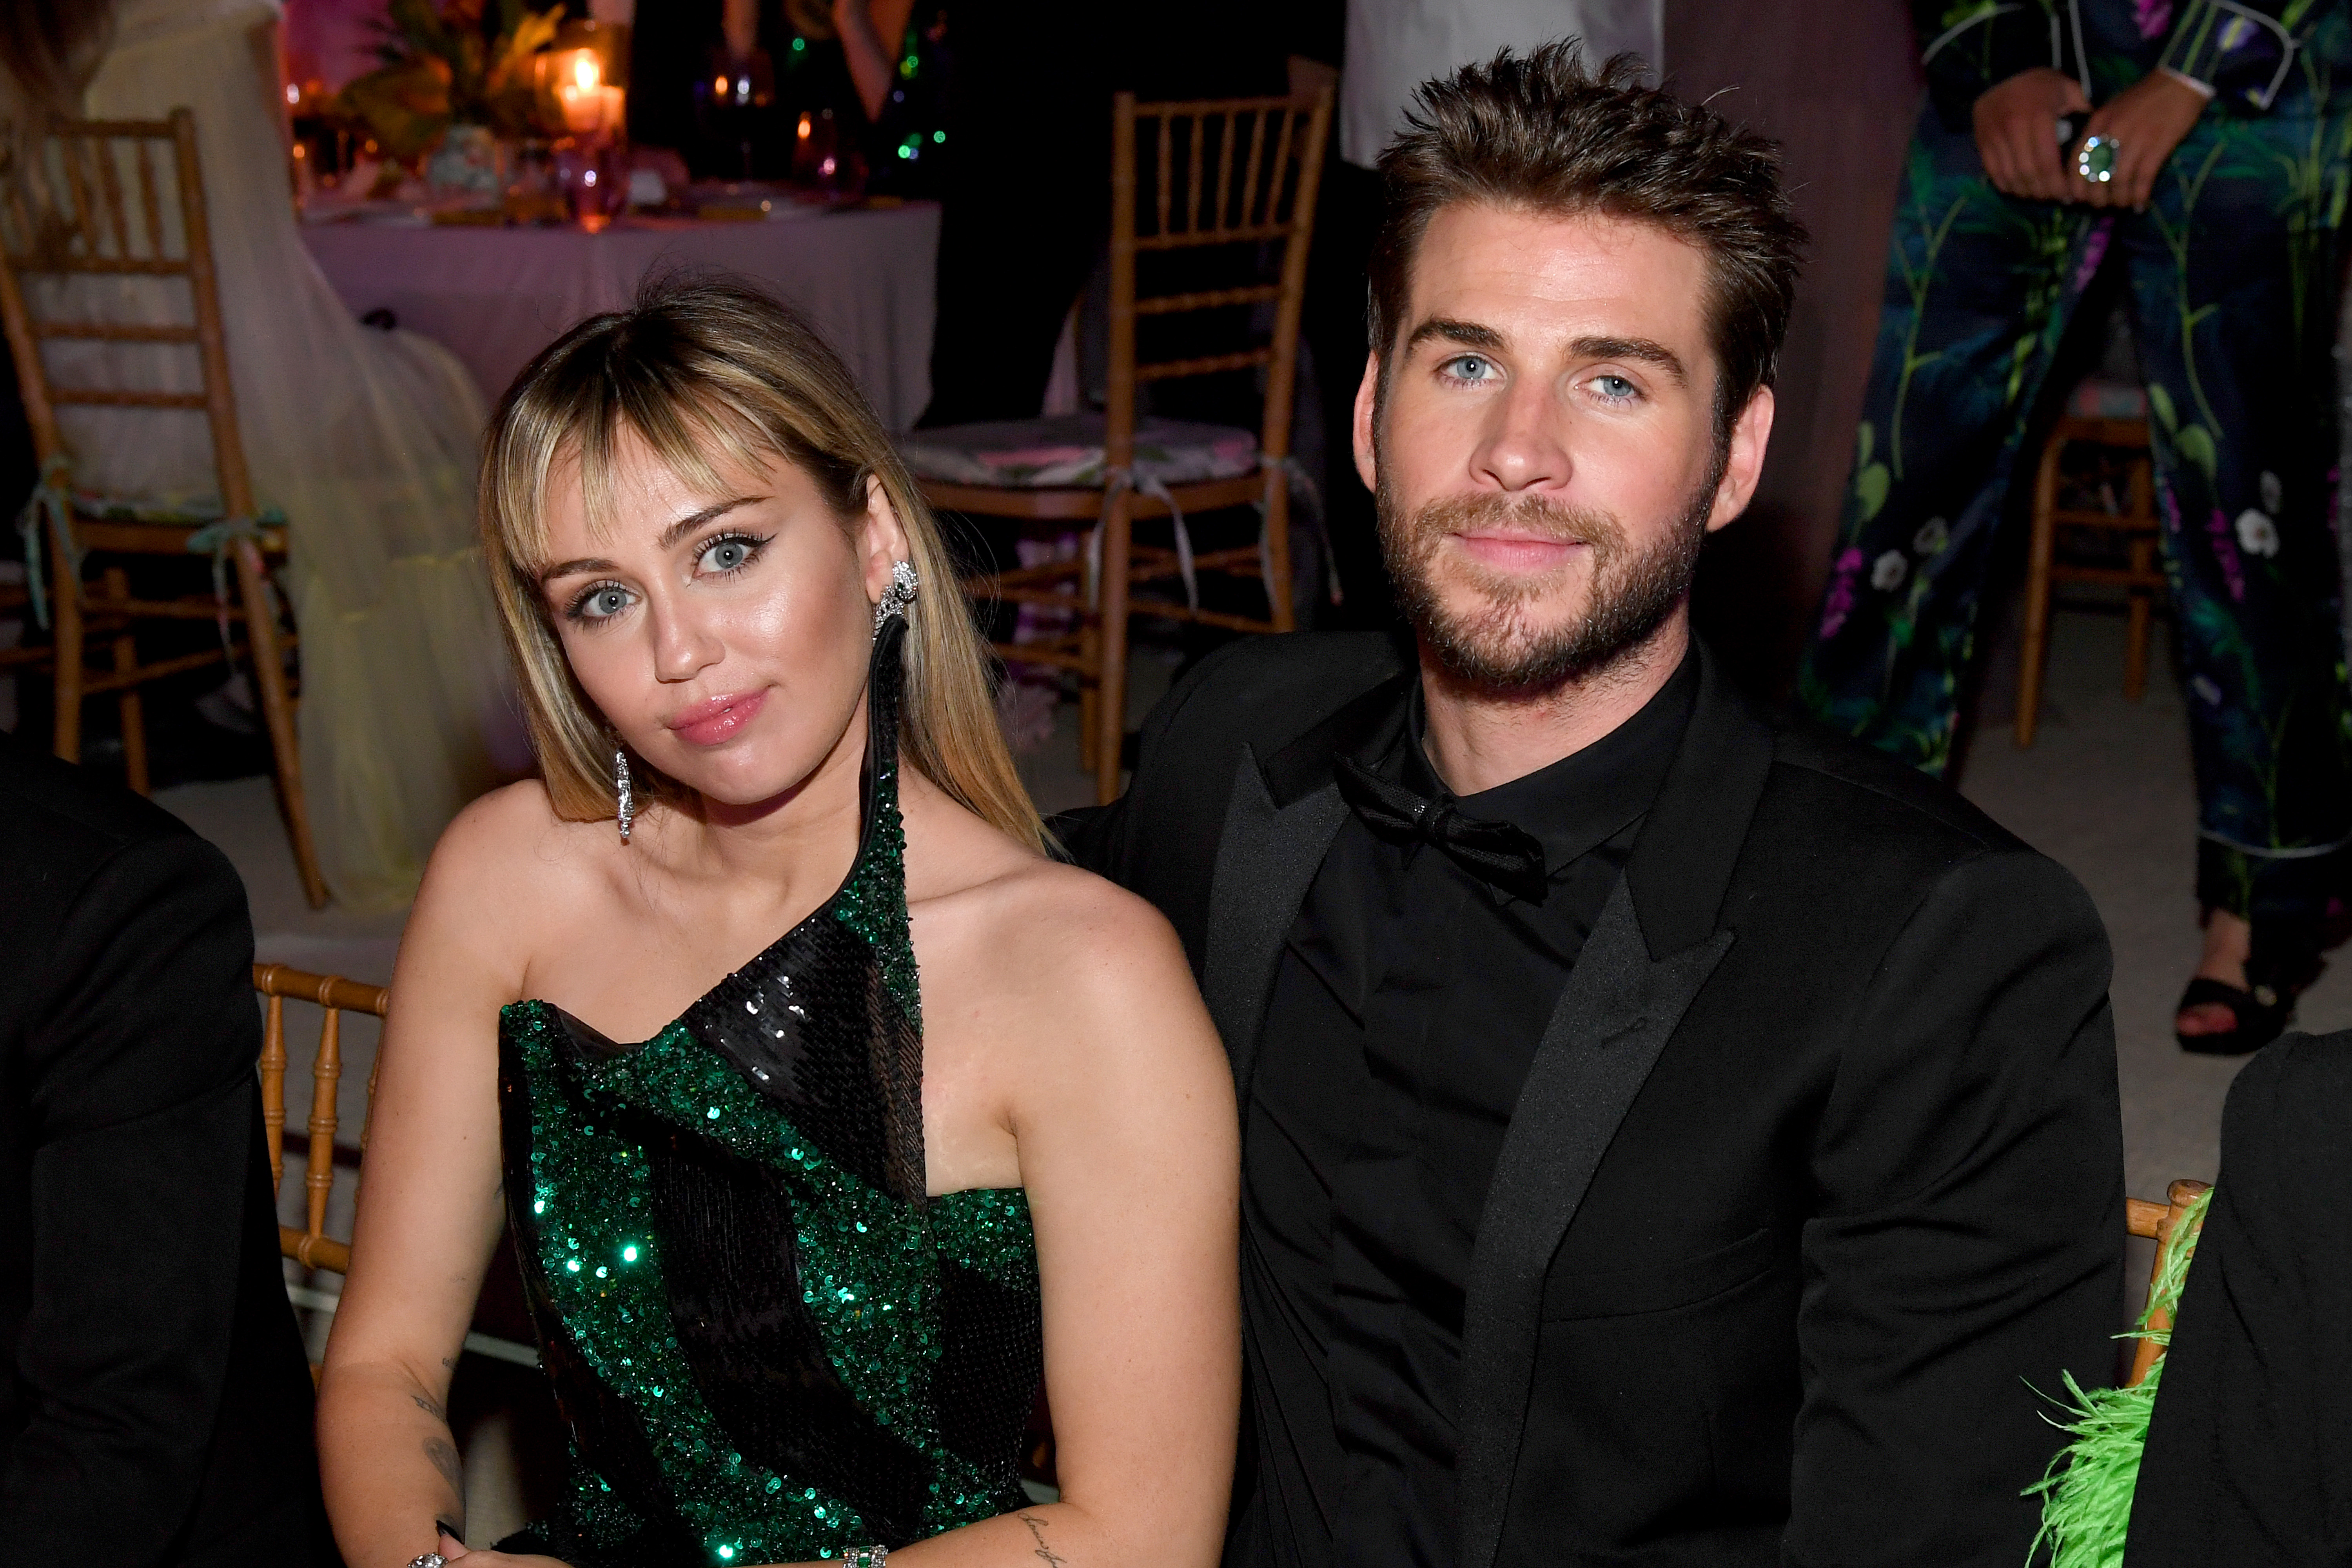 Miley Cyrus and Liam Hemsworth at The 2019 Met Gala Celebrating Camp: Notes on Fashion held at the Metropolitan Museum of Art in New York City, New York, on May 06, 2019. | Source: Getty Images